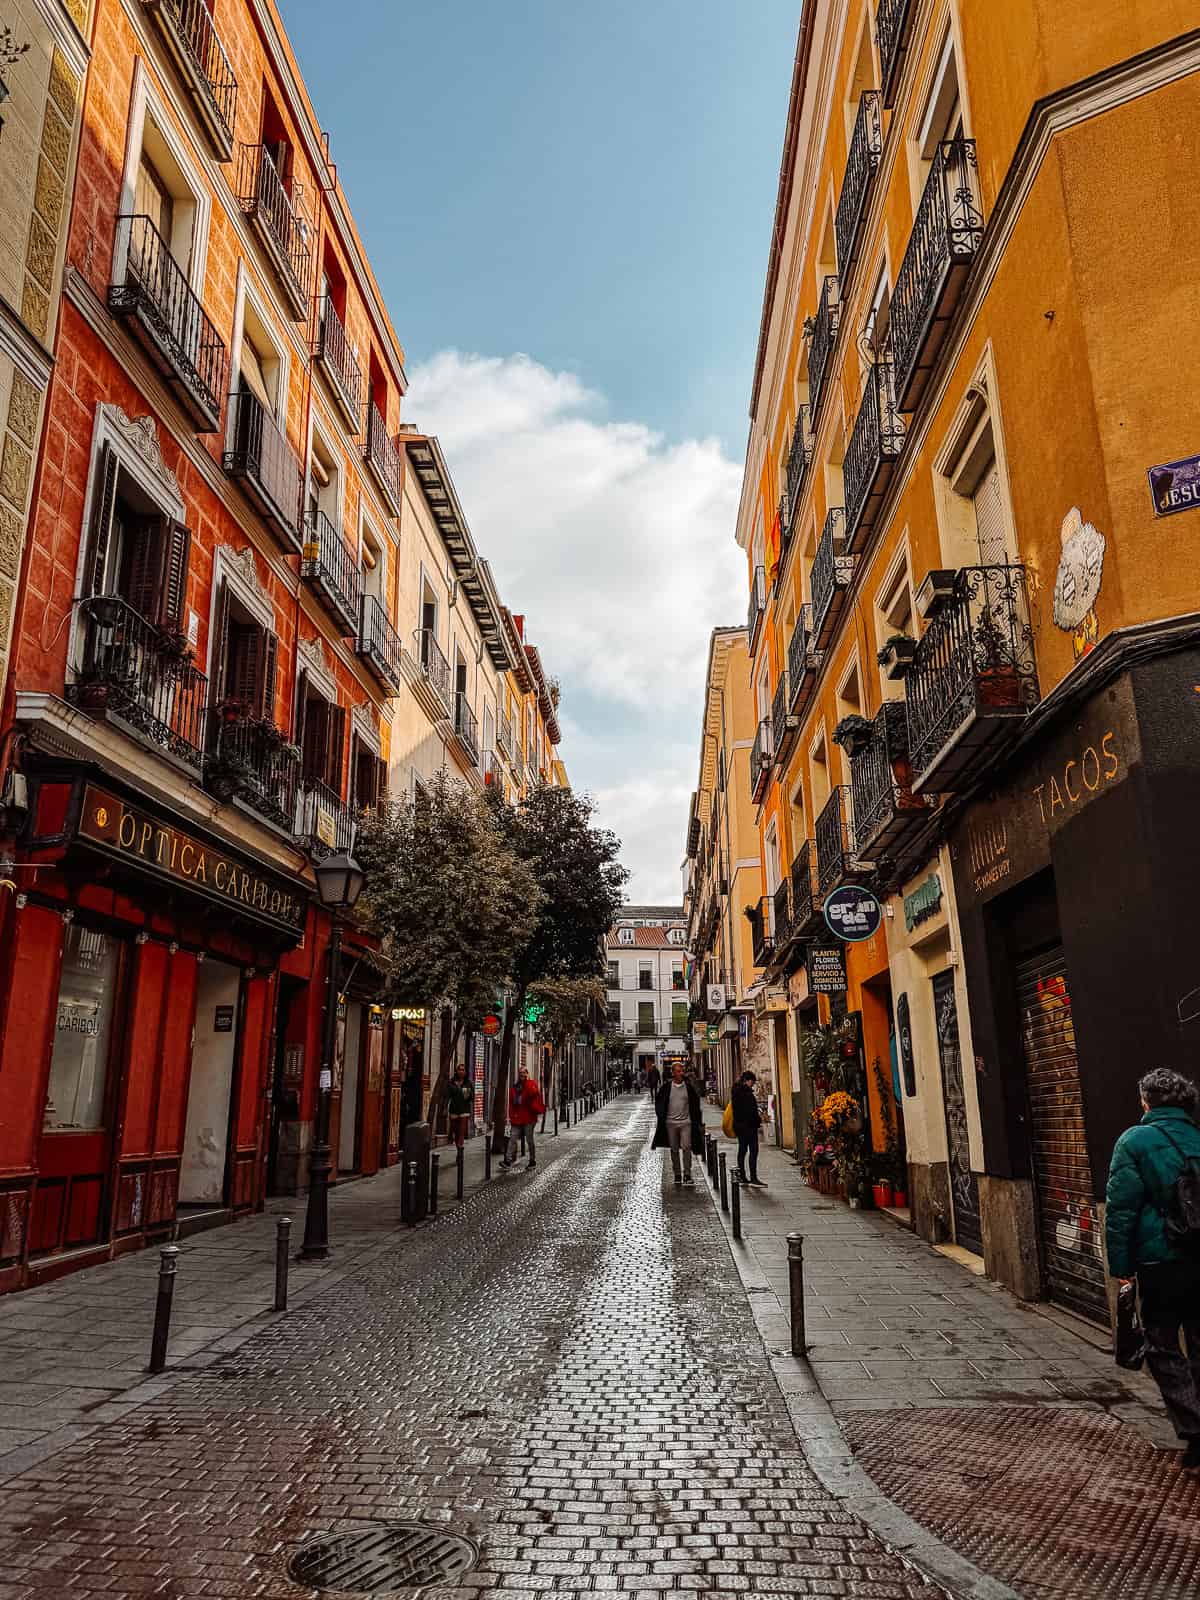 A picturesque view of a historic street in Madrid, with vibrant orange and yellow facades, ornate balconies, and pedestrians enjoying a sunny day.